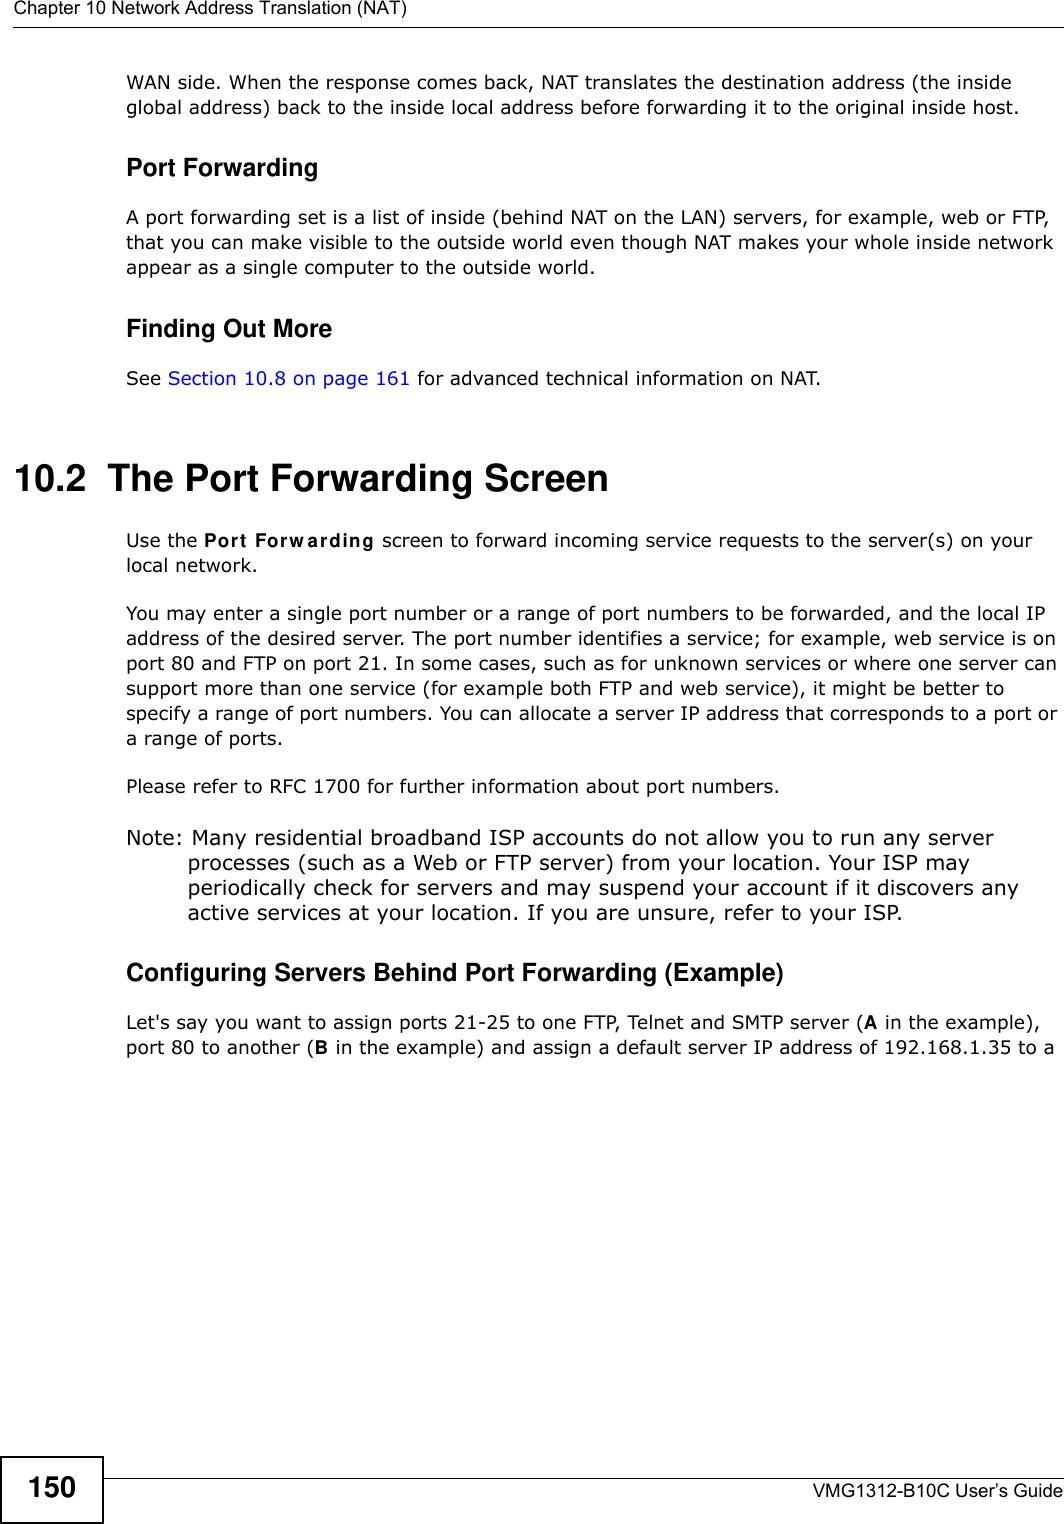 Chapter 10 Network Address Translation (NAT)VMG1312-B10C User’s Guide150WAN side. When the response comes back, NAT translates the destination address (the inside global address) back to the inside local address before forwarding it to the original inside host.Port ForwardingA port forwarding set is a list of inside (behind NAT on the LAN) servers, for example, web or FTP, that you can make visible to the outside world even though NAT makes your whole inside network appear as a single computer to the outside world.Finding Out MoreSee Section 10.8 on page 161 for advanced technical information on NAT.10.2  The Port Forwarding Screen Use the Port  For w arding screen to forward incoming service requests to the server(s) on your local network.You may enter a single port number or a range of port numbers to be forwarded, and the local IP address of the desired server. The port number identifies a service; for example, web service is on port 80 and FTP on port 21. In some cases, such as for unknown services or where one server can support more than one service (for example both FTP and web service), it might be better to specify a range of port numbers. You can allocate a server IP address that corresponds to a port or a range of ports.Please refer to RFC 1700 for further information about port numbers. Note: Many residential broadband ISP accounts do not allow you to run any server processes (such as a Web or FTP server) from your location. Your ISP may periodically check for servers and may suspend your account if it discovers any active services at your location. If you are unsure, refer to your ISP.Configuring Servers Behind Port Forwarding (Example)Let&apos;s say you want to assign ports 21-25 to one FTP, Telnet and SMTP server (A in the example), port 80 to another (B in the example) and assign a default server IP address of 192.168.1.35 to a 